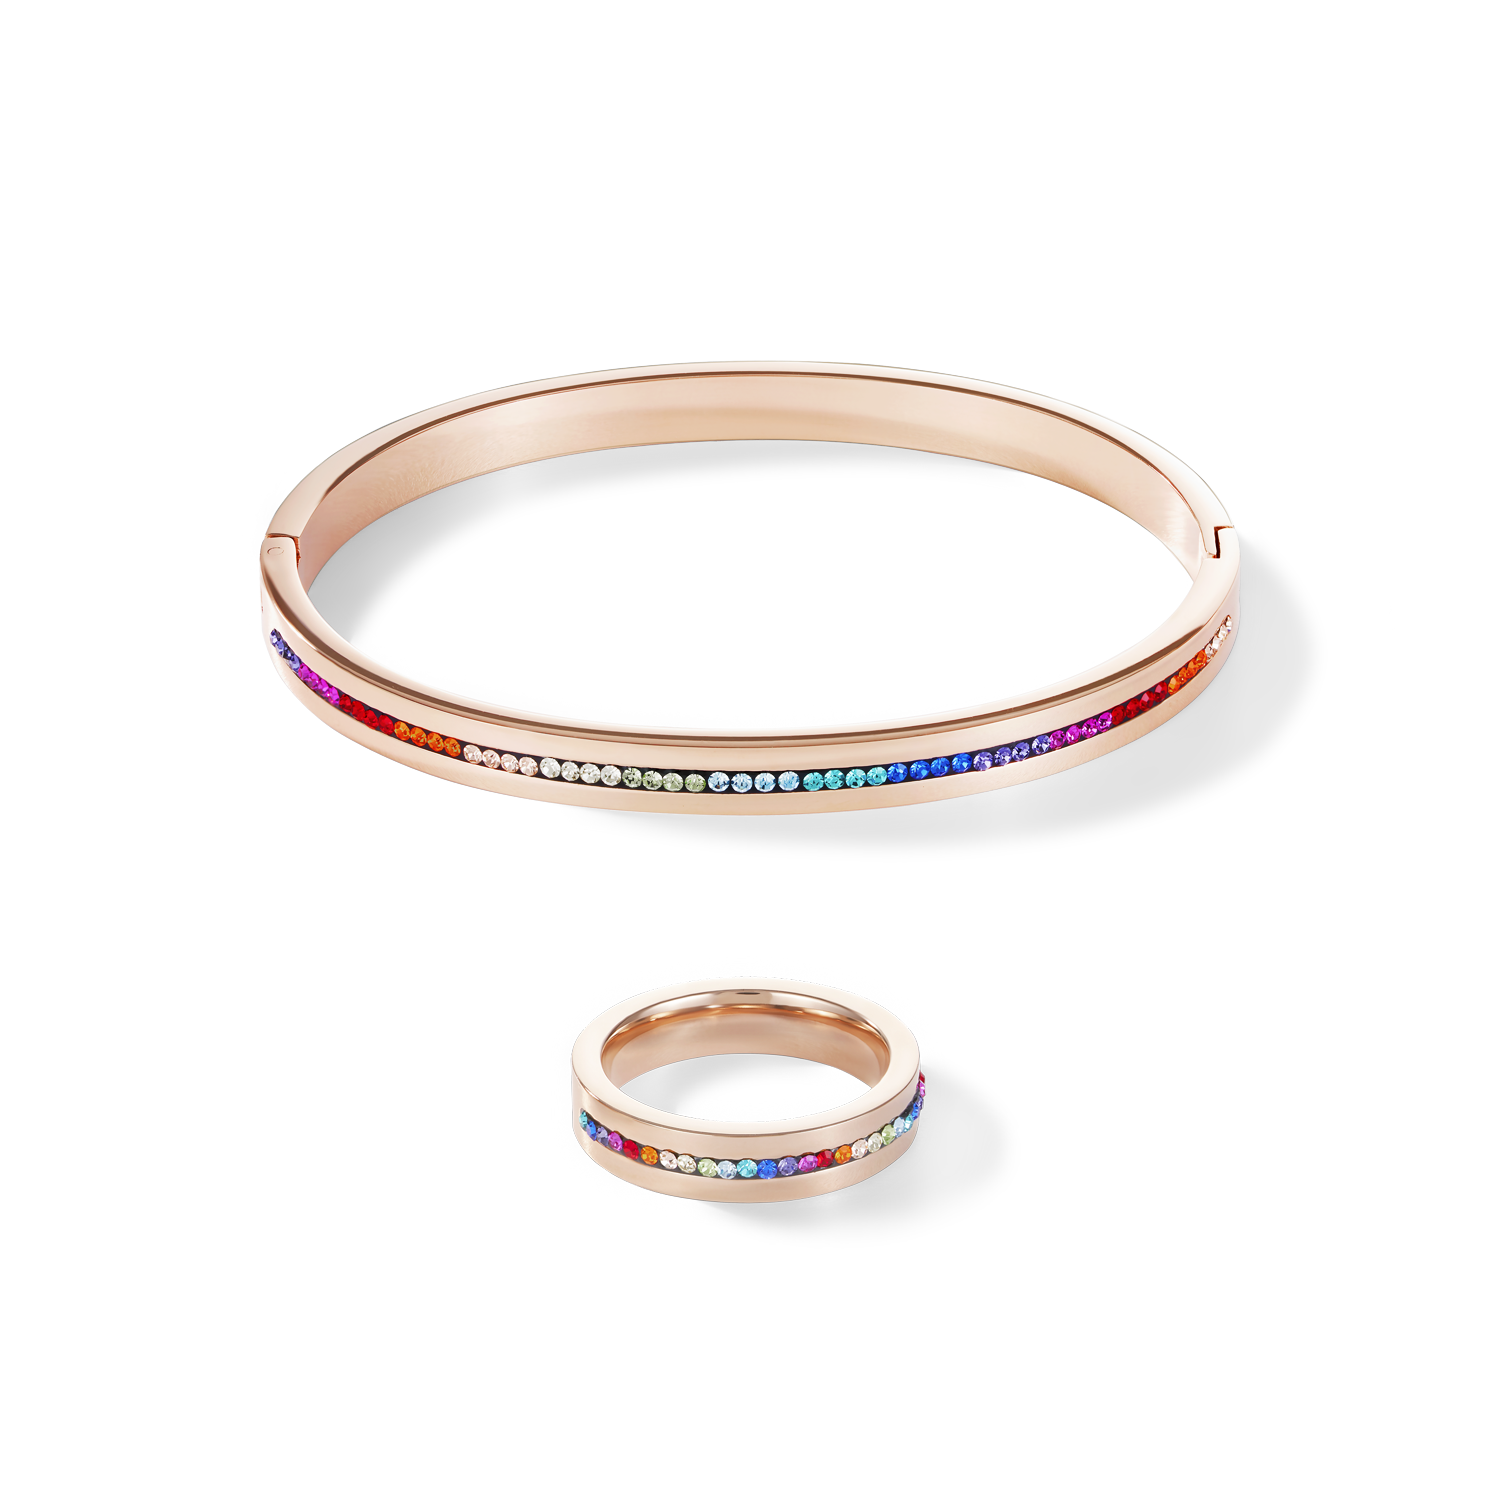 Bangle stainless steel rose gold & crystals pavé strip multicolour